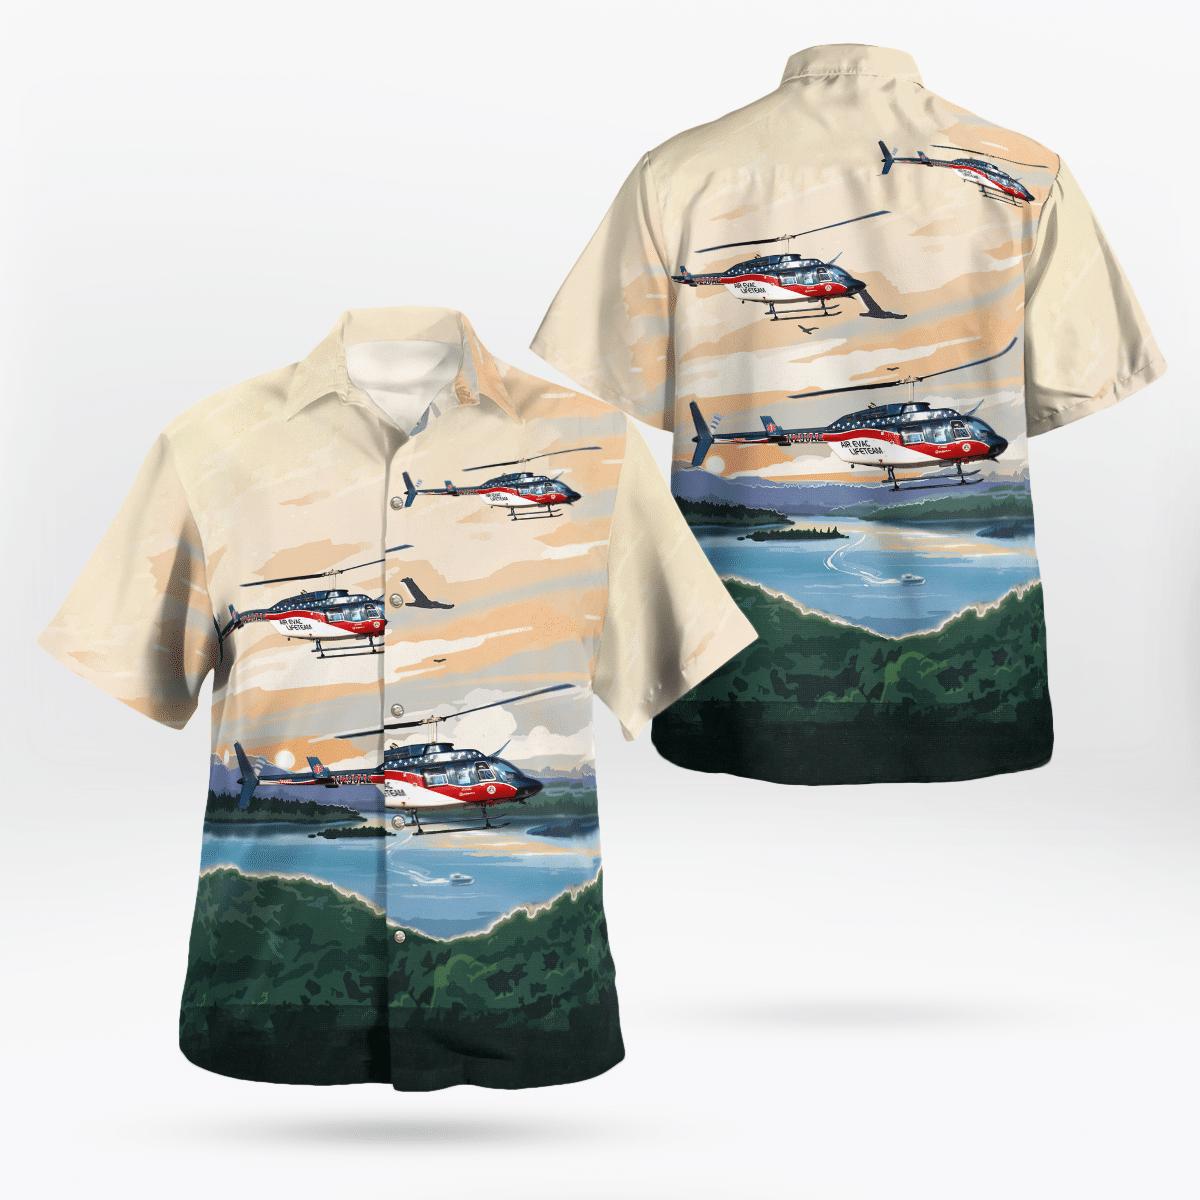 If you are in need of a new summertime look, pick up this Hawaiian shirt 81